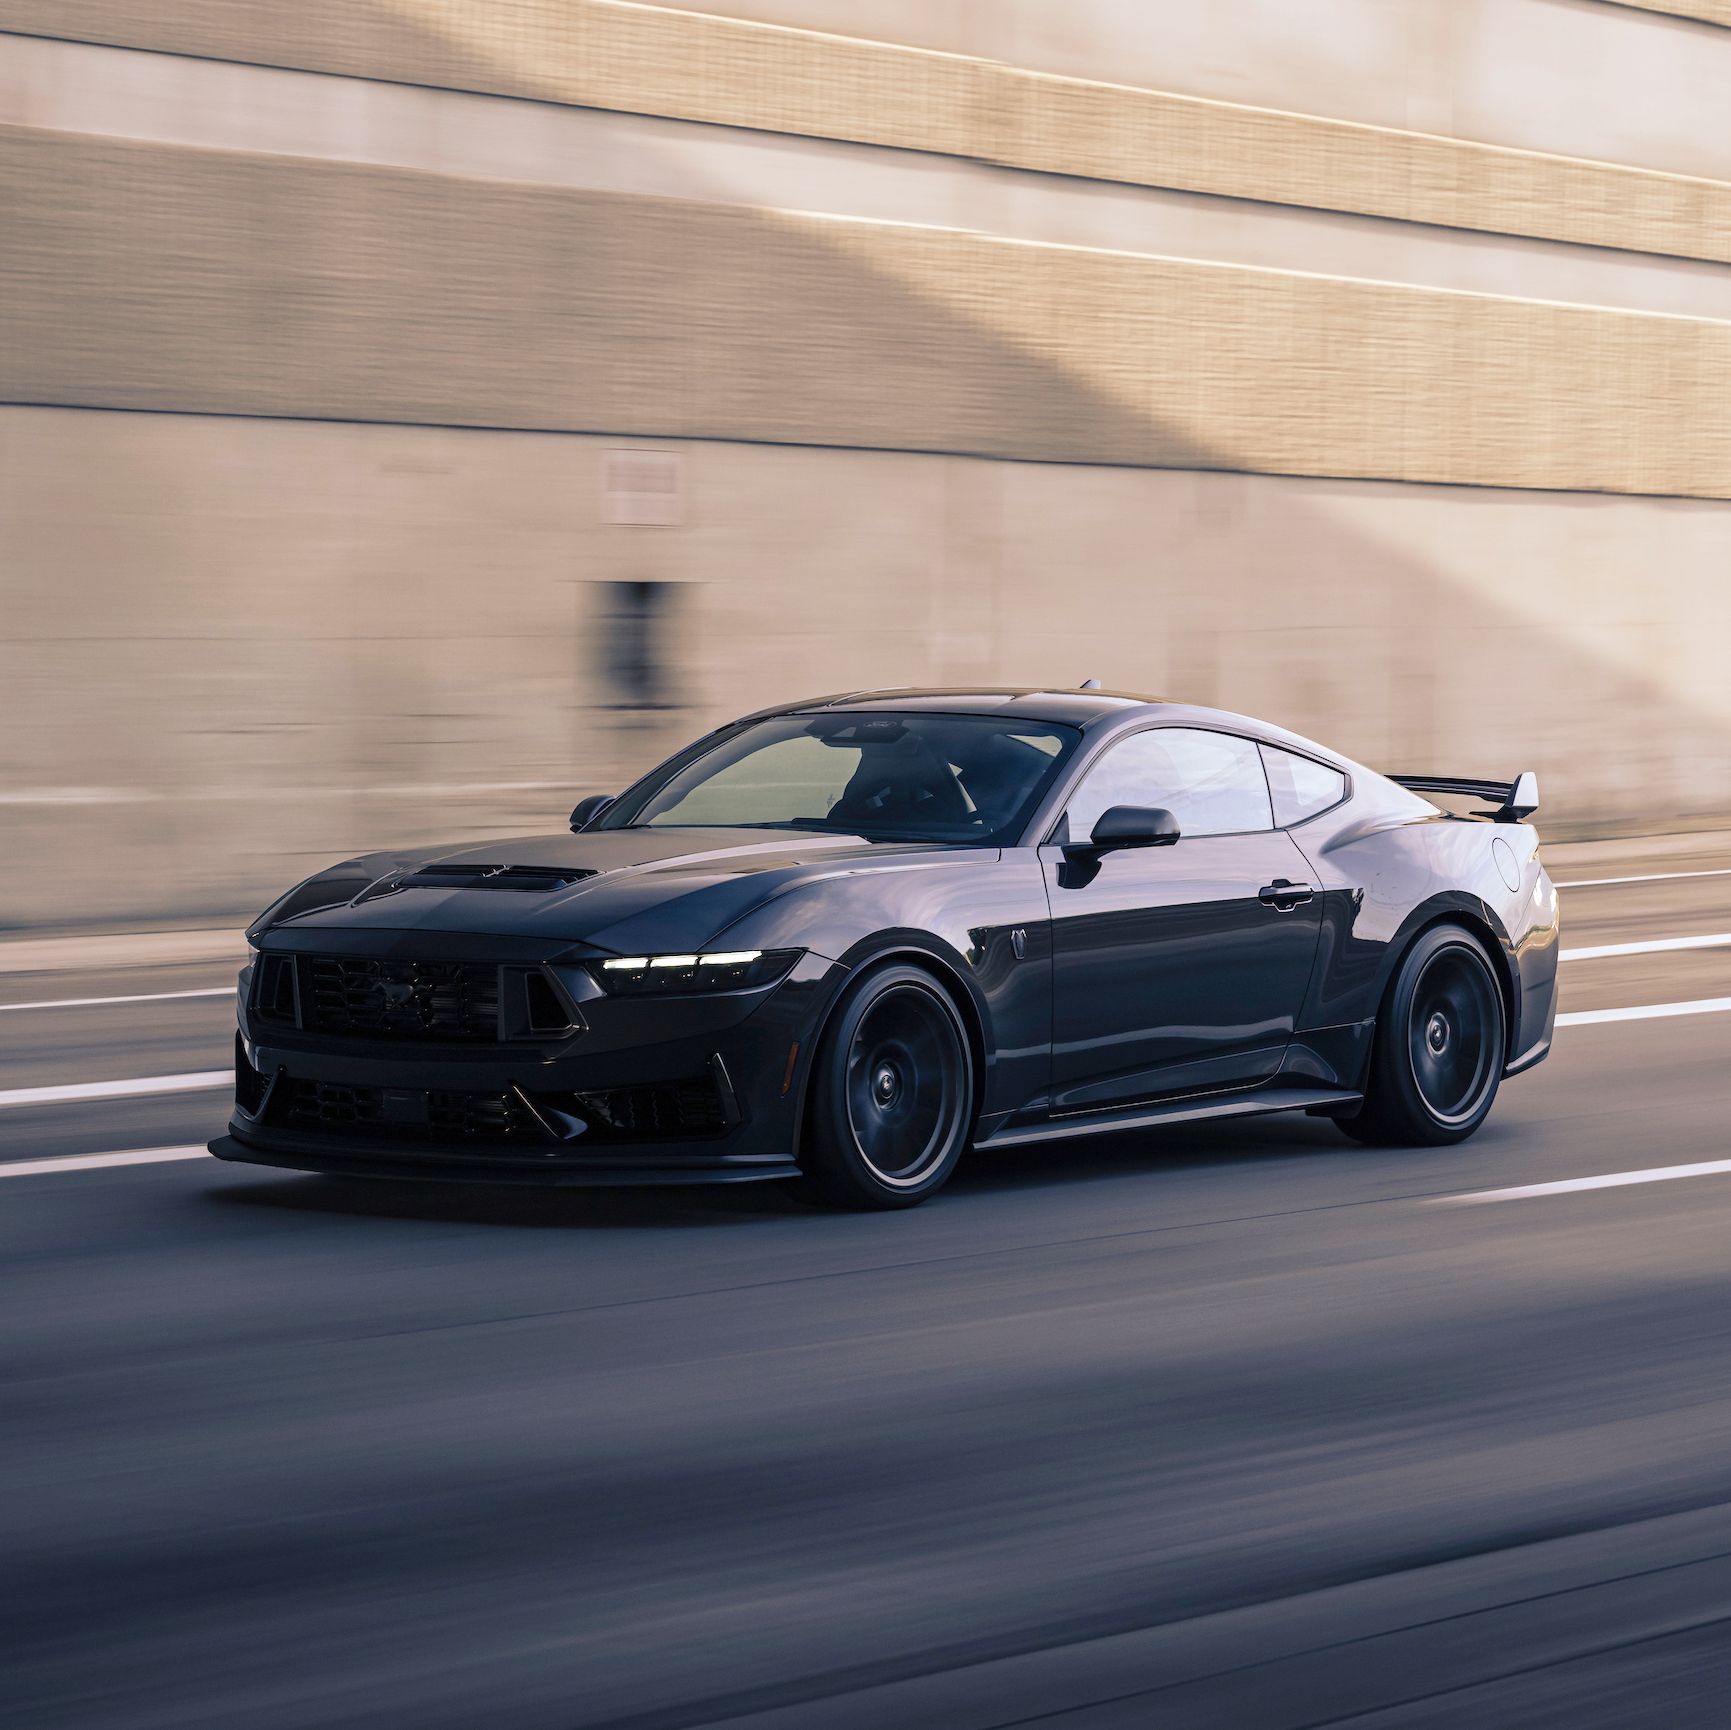 The Ford Mustang Dark Horse Is Just a Beginning